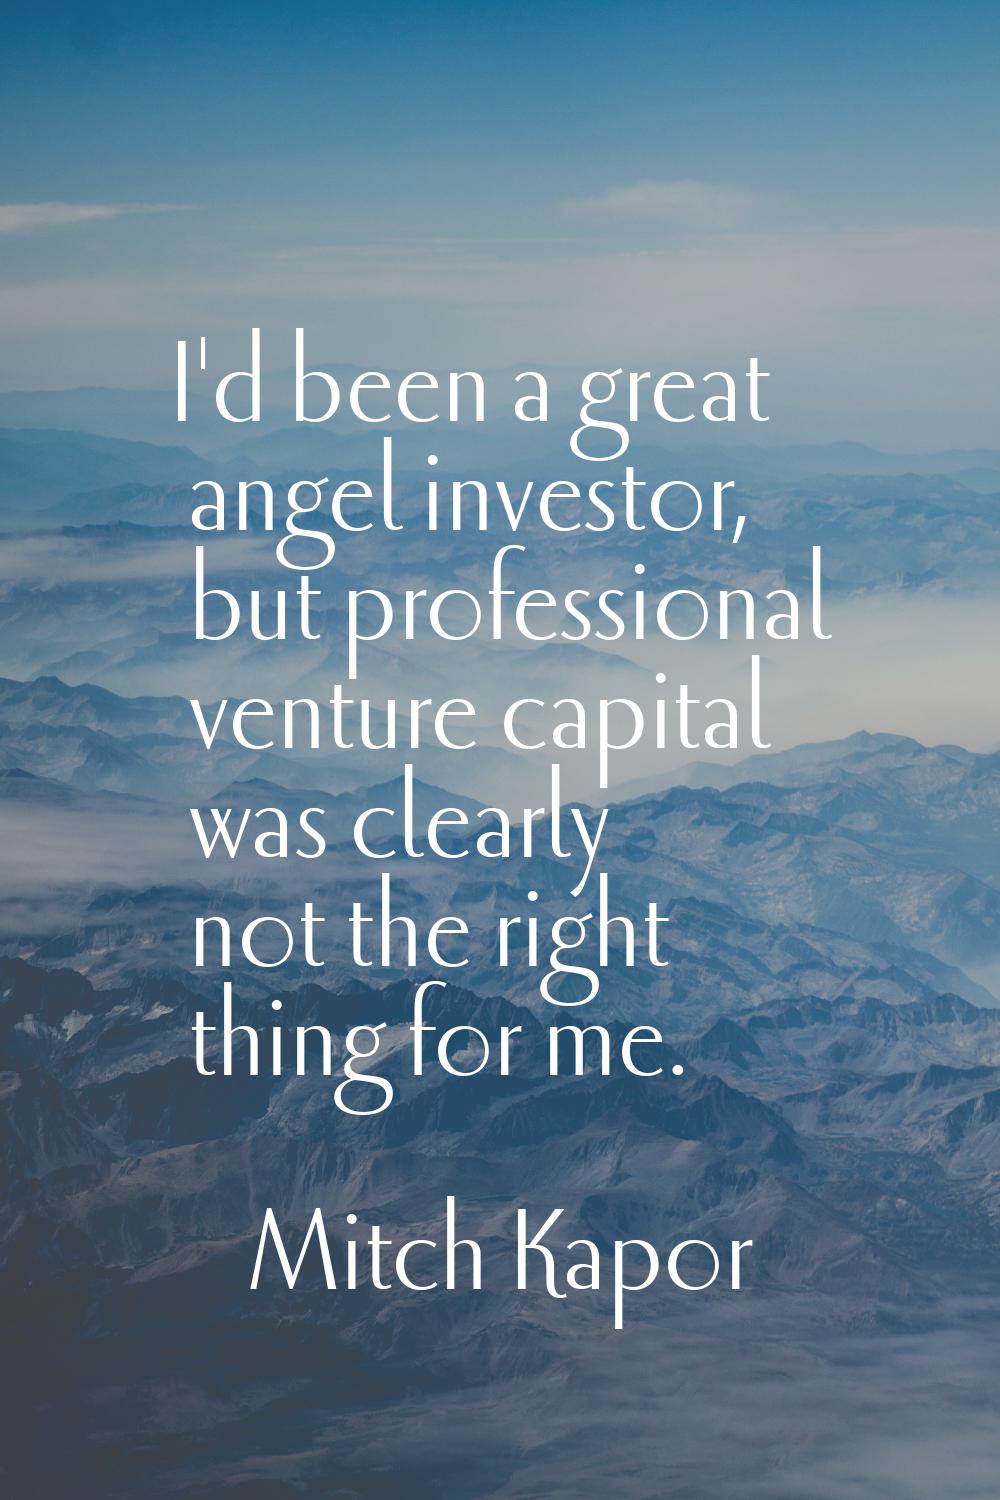 I'd been a great angel investor, but professional venture capital was clearly not the right thing f